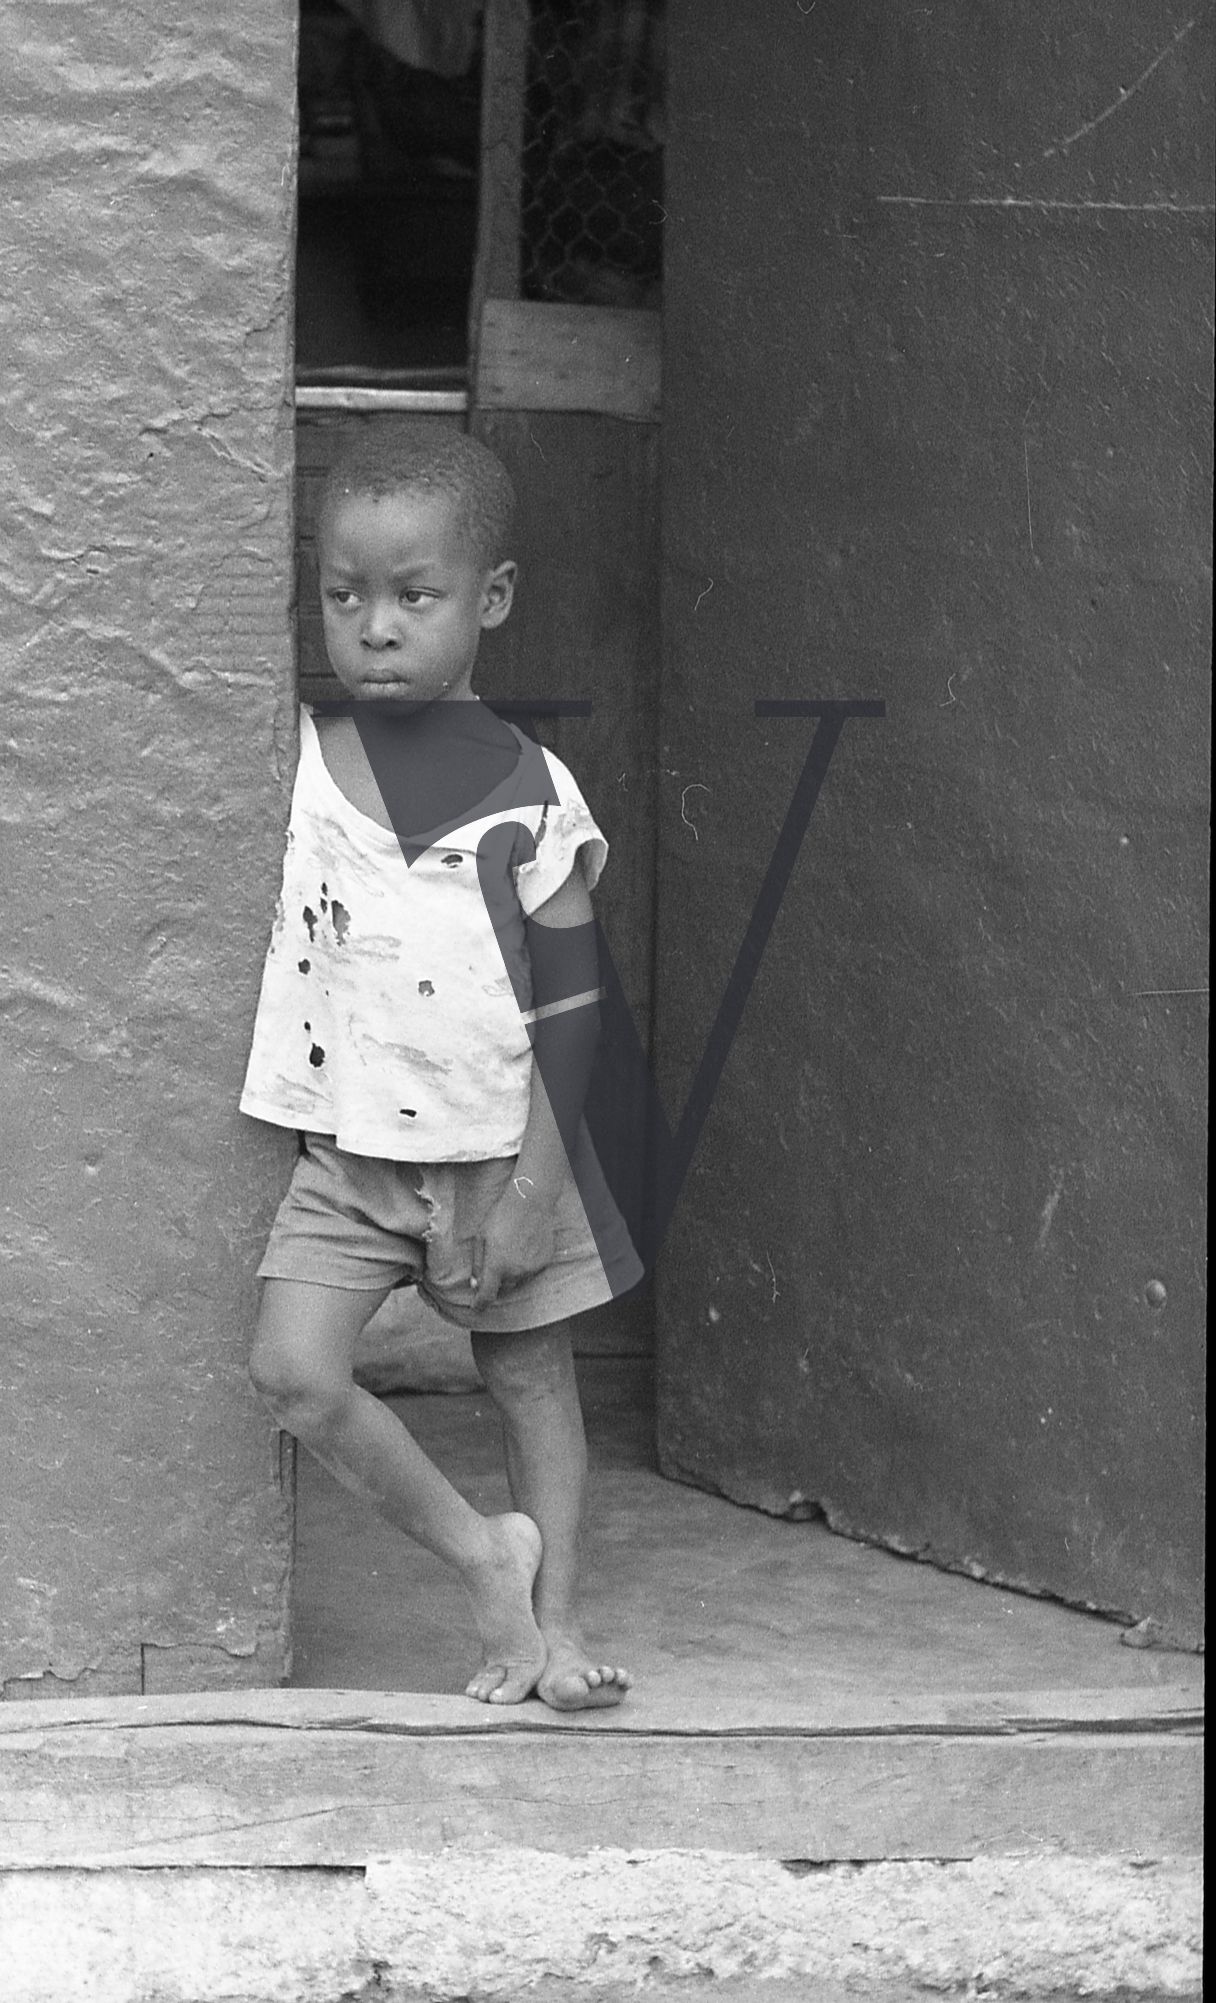 Jamaica, Boy looks out on to street, portrait.